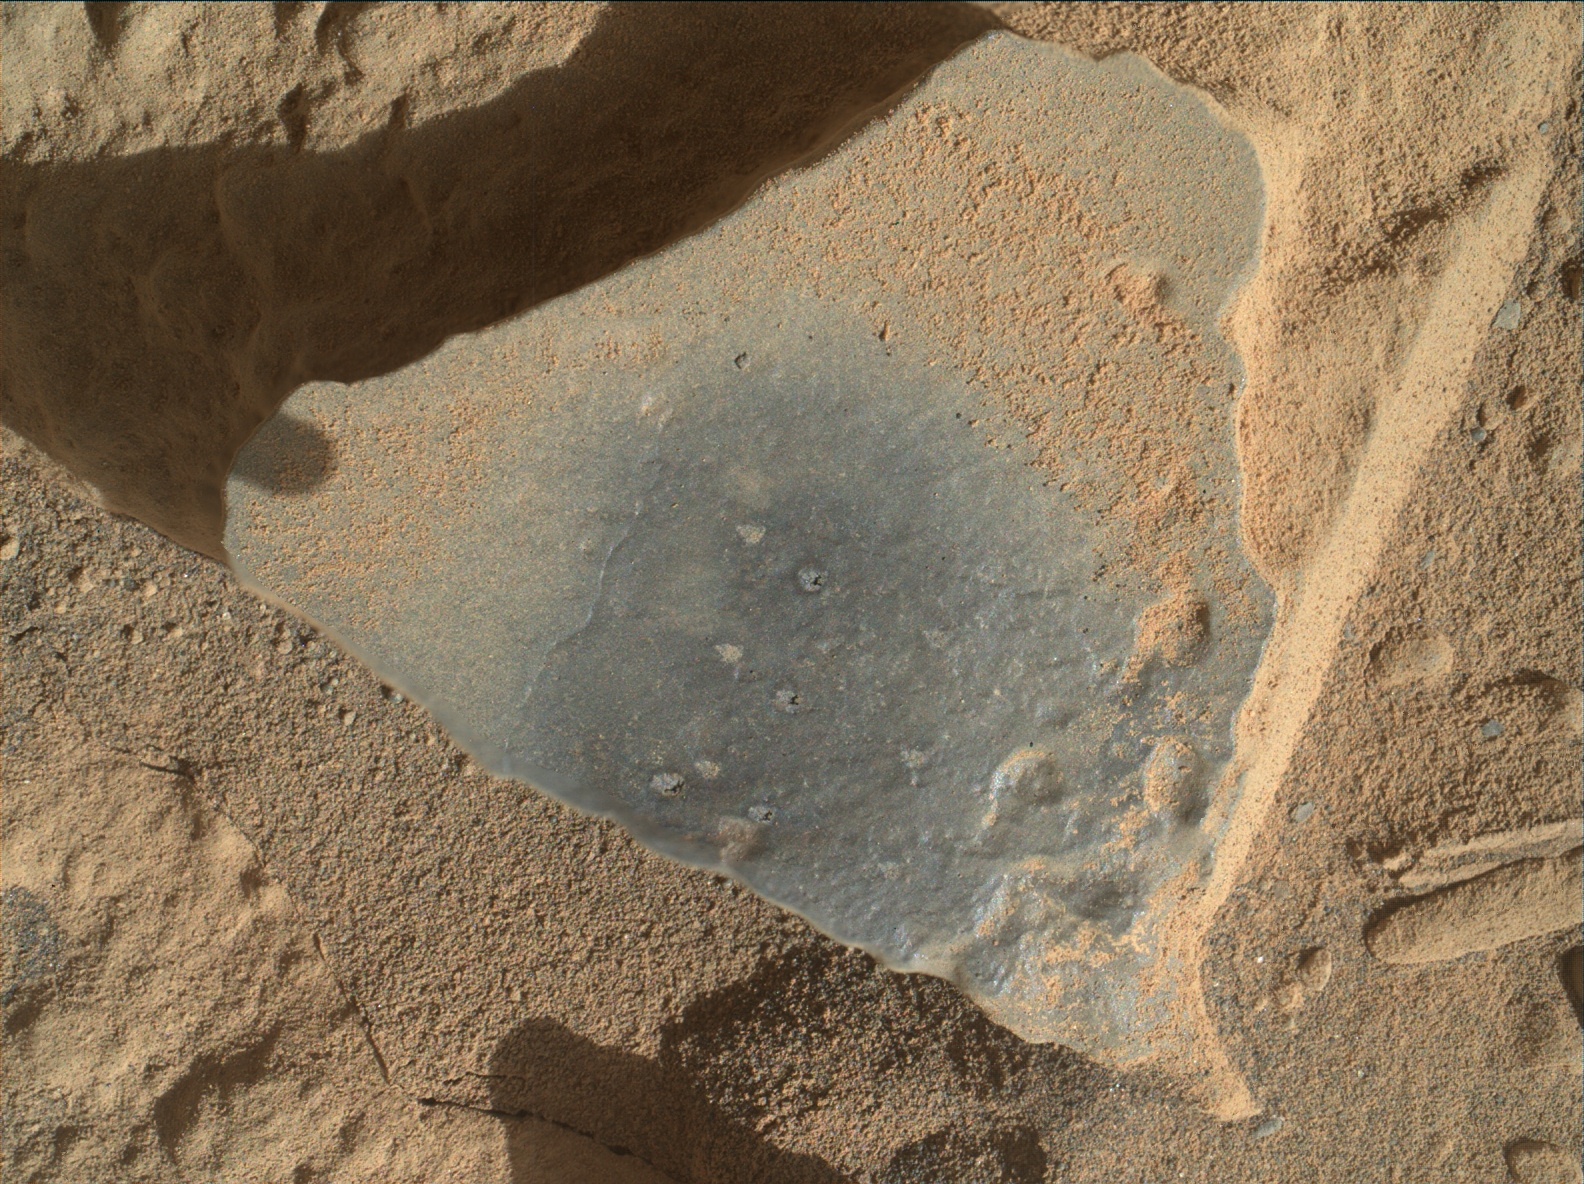 Nasa's Mars rover Curiosity acquired this image using its Mars Hand Lens Imager (MAHLI) on Sol 627